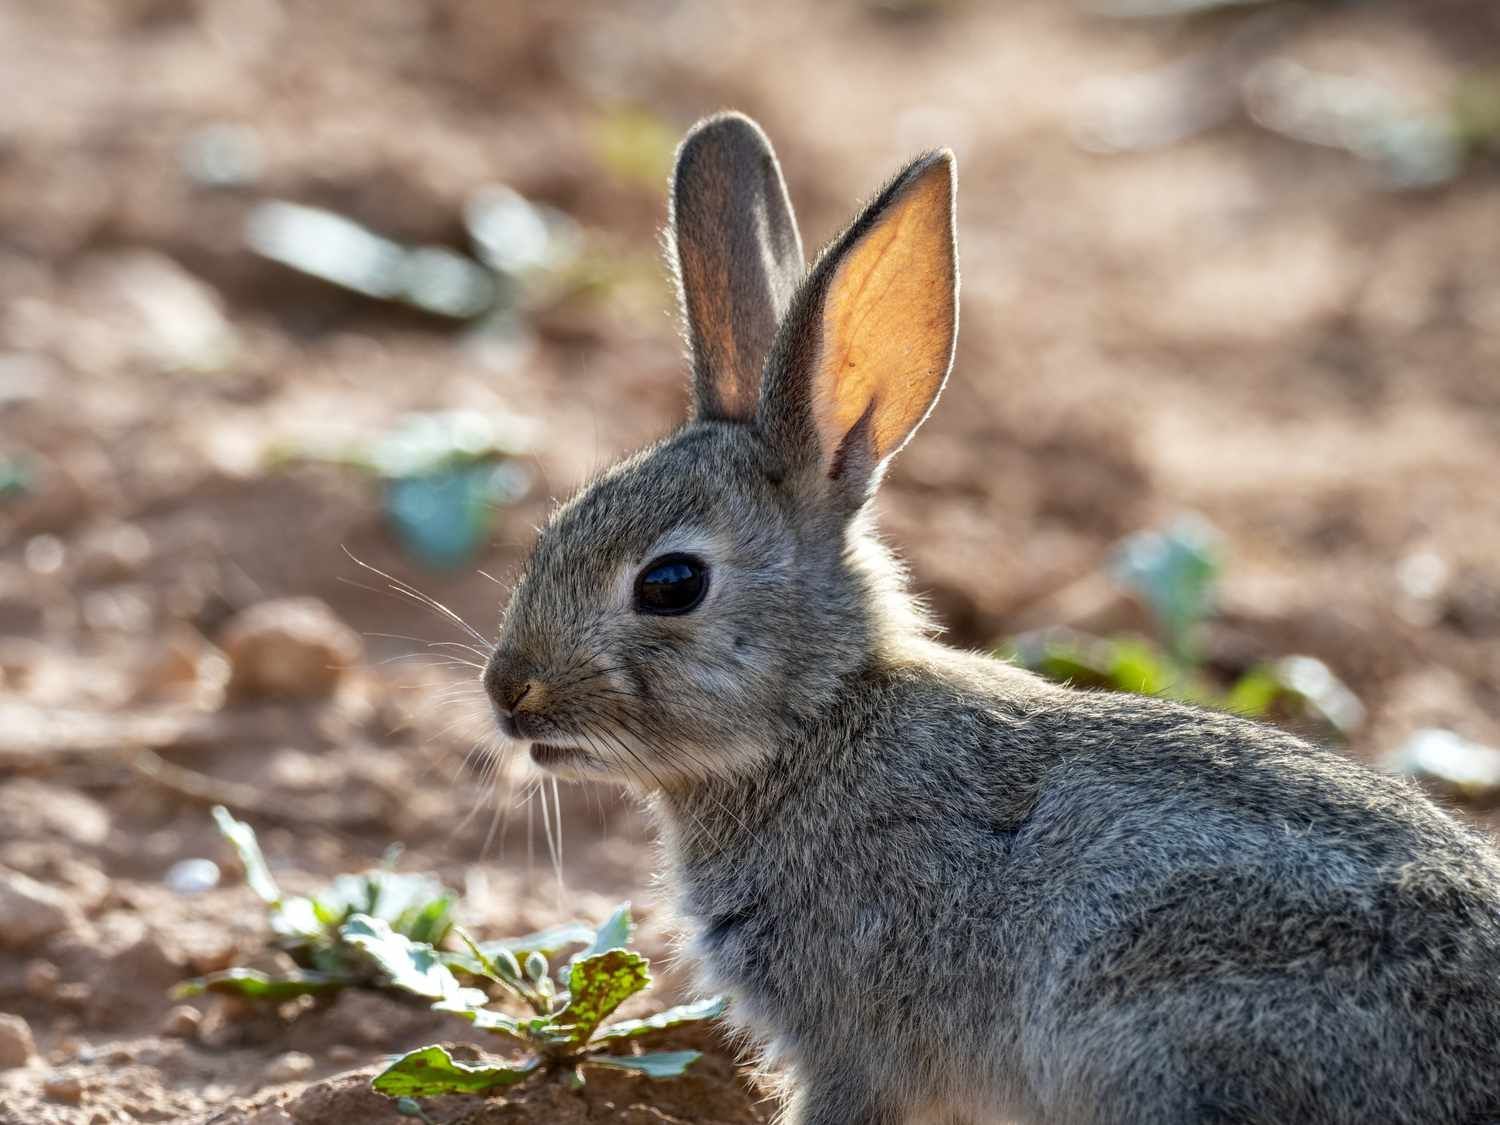 A small rabbit is standing in the dirt and looking at the camera.